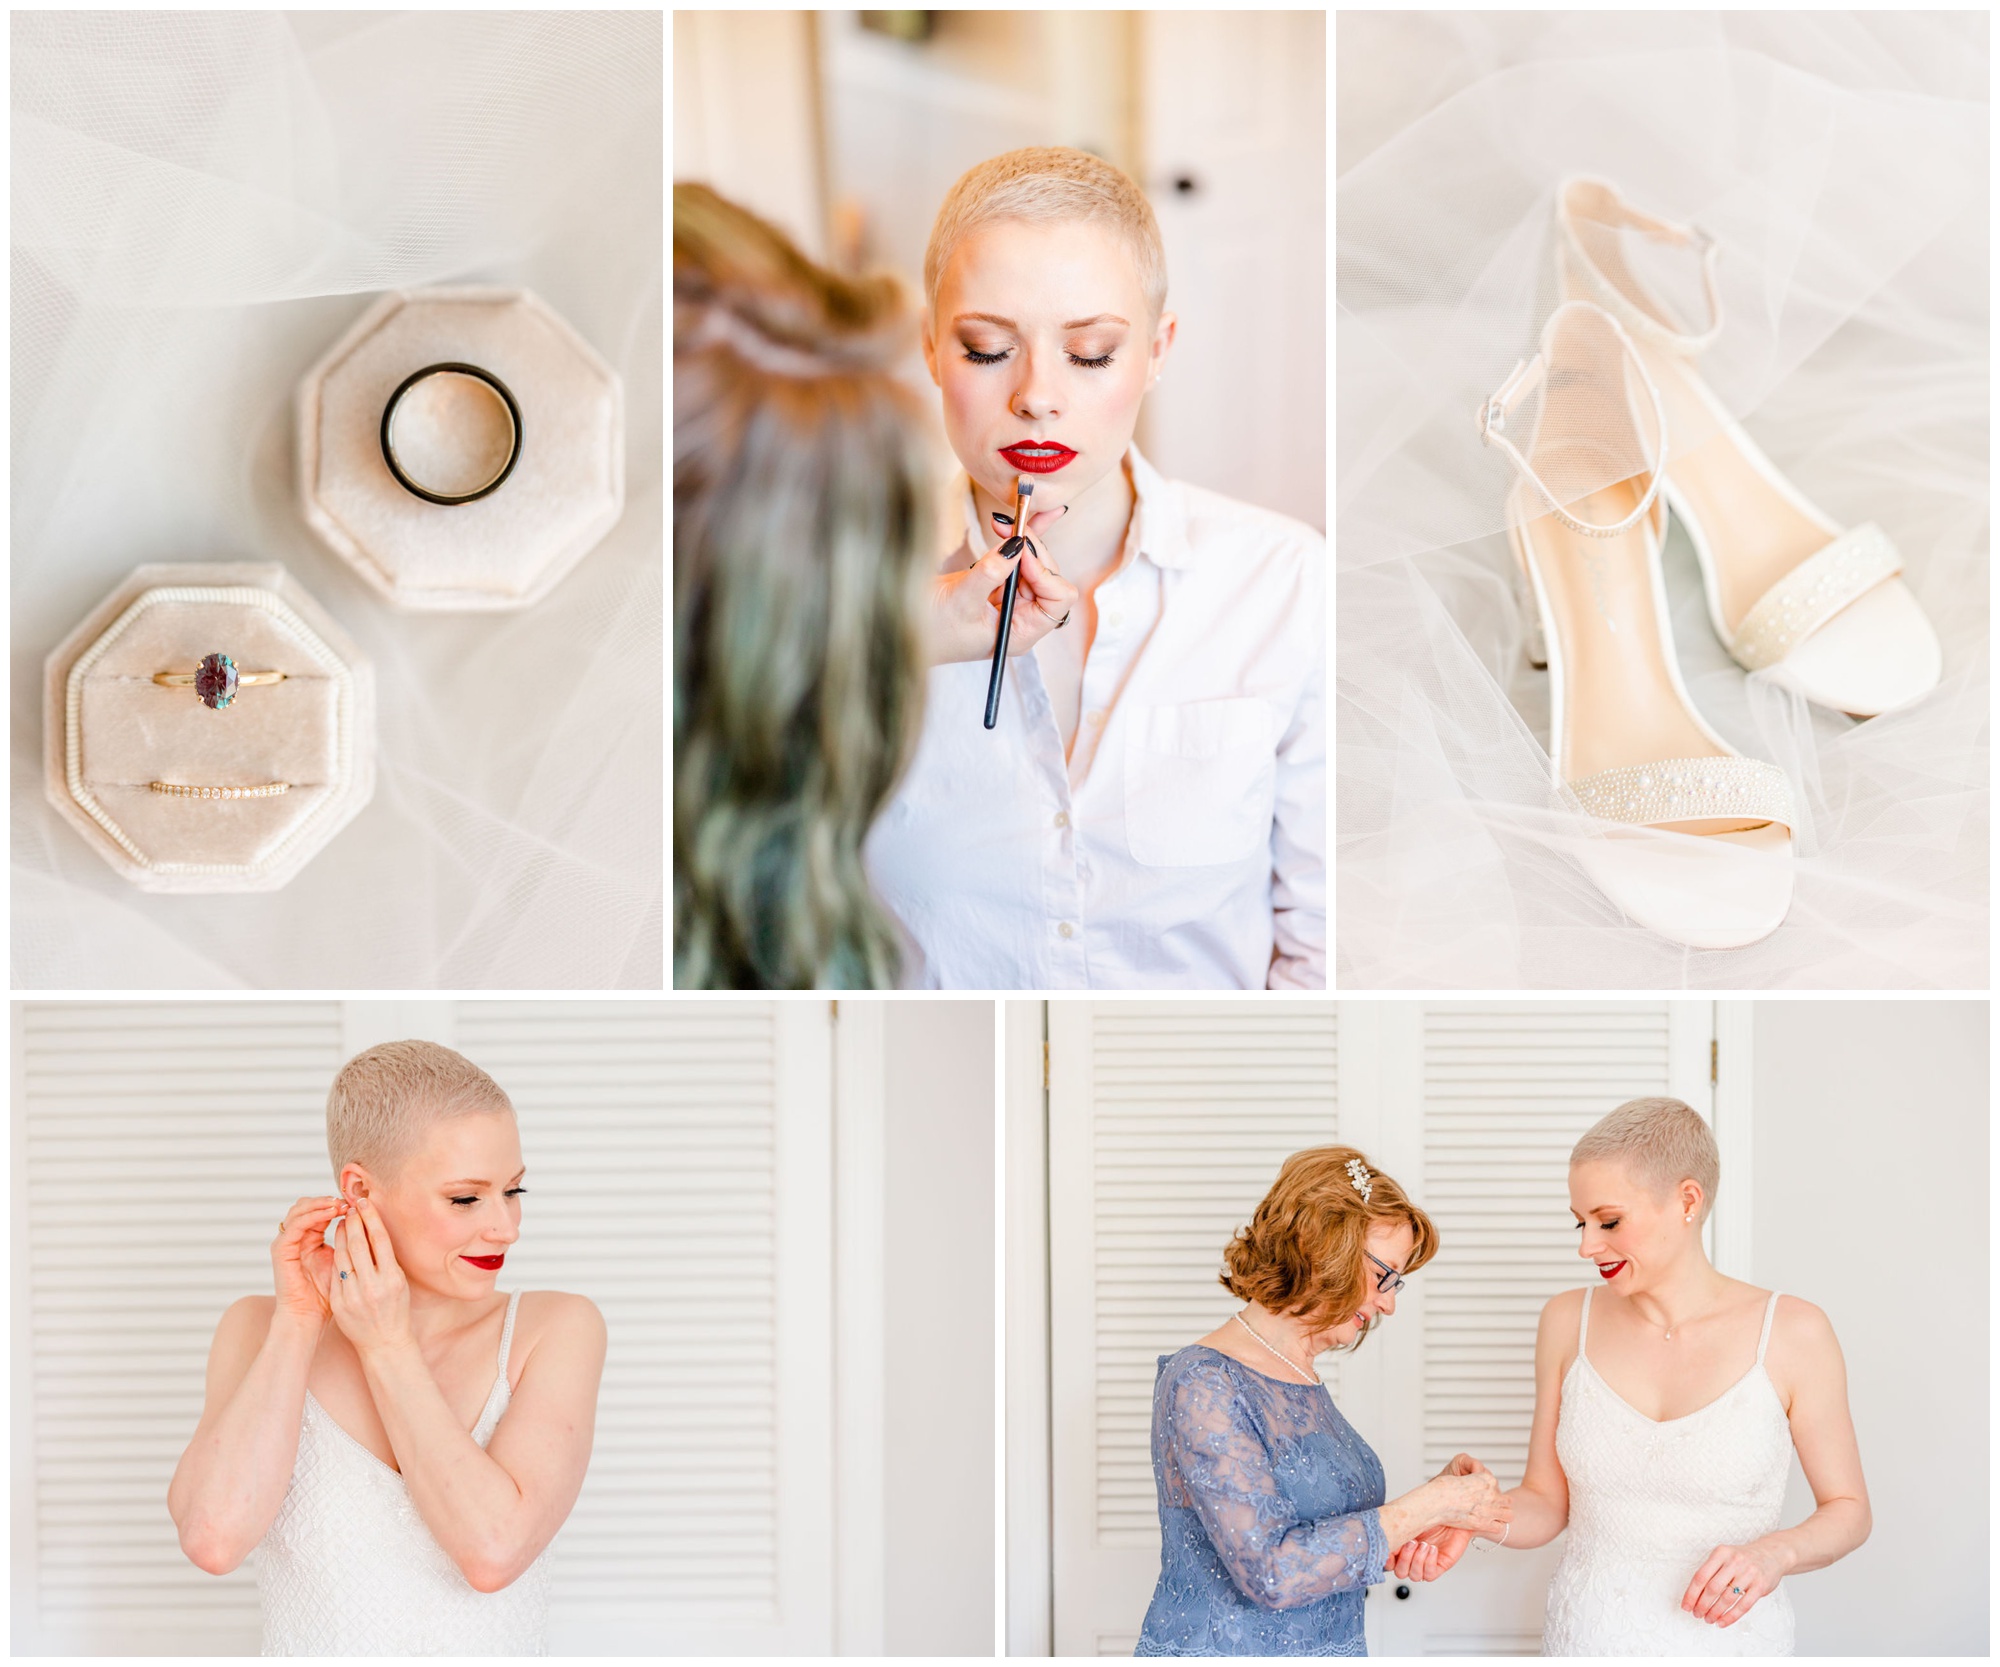 how to prepare your home for photos, wedding photography tips, tips for engaged couples, elopement tips, small wedding tips, in-home portraits, in-home photos, D.C. wedding photographer, Virginia wedding photographer, Baltimore wedding photographer, Rachel E.H. Photography, wedding lip liner, woman helping bride, emerald engagement ring, short haired bride